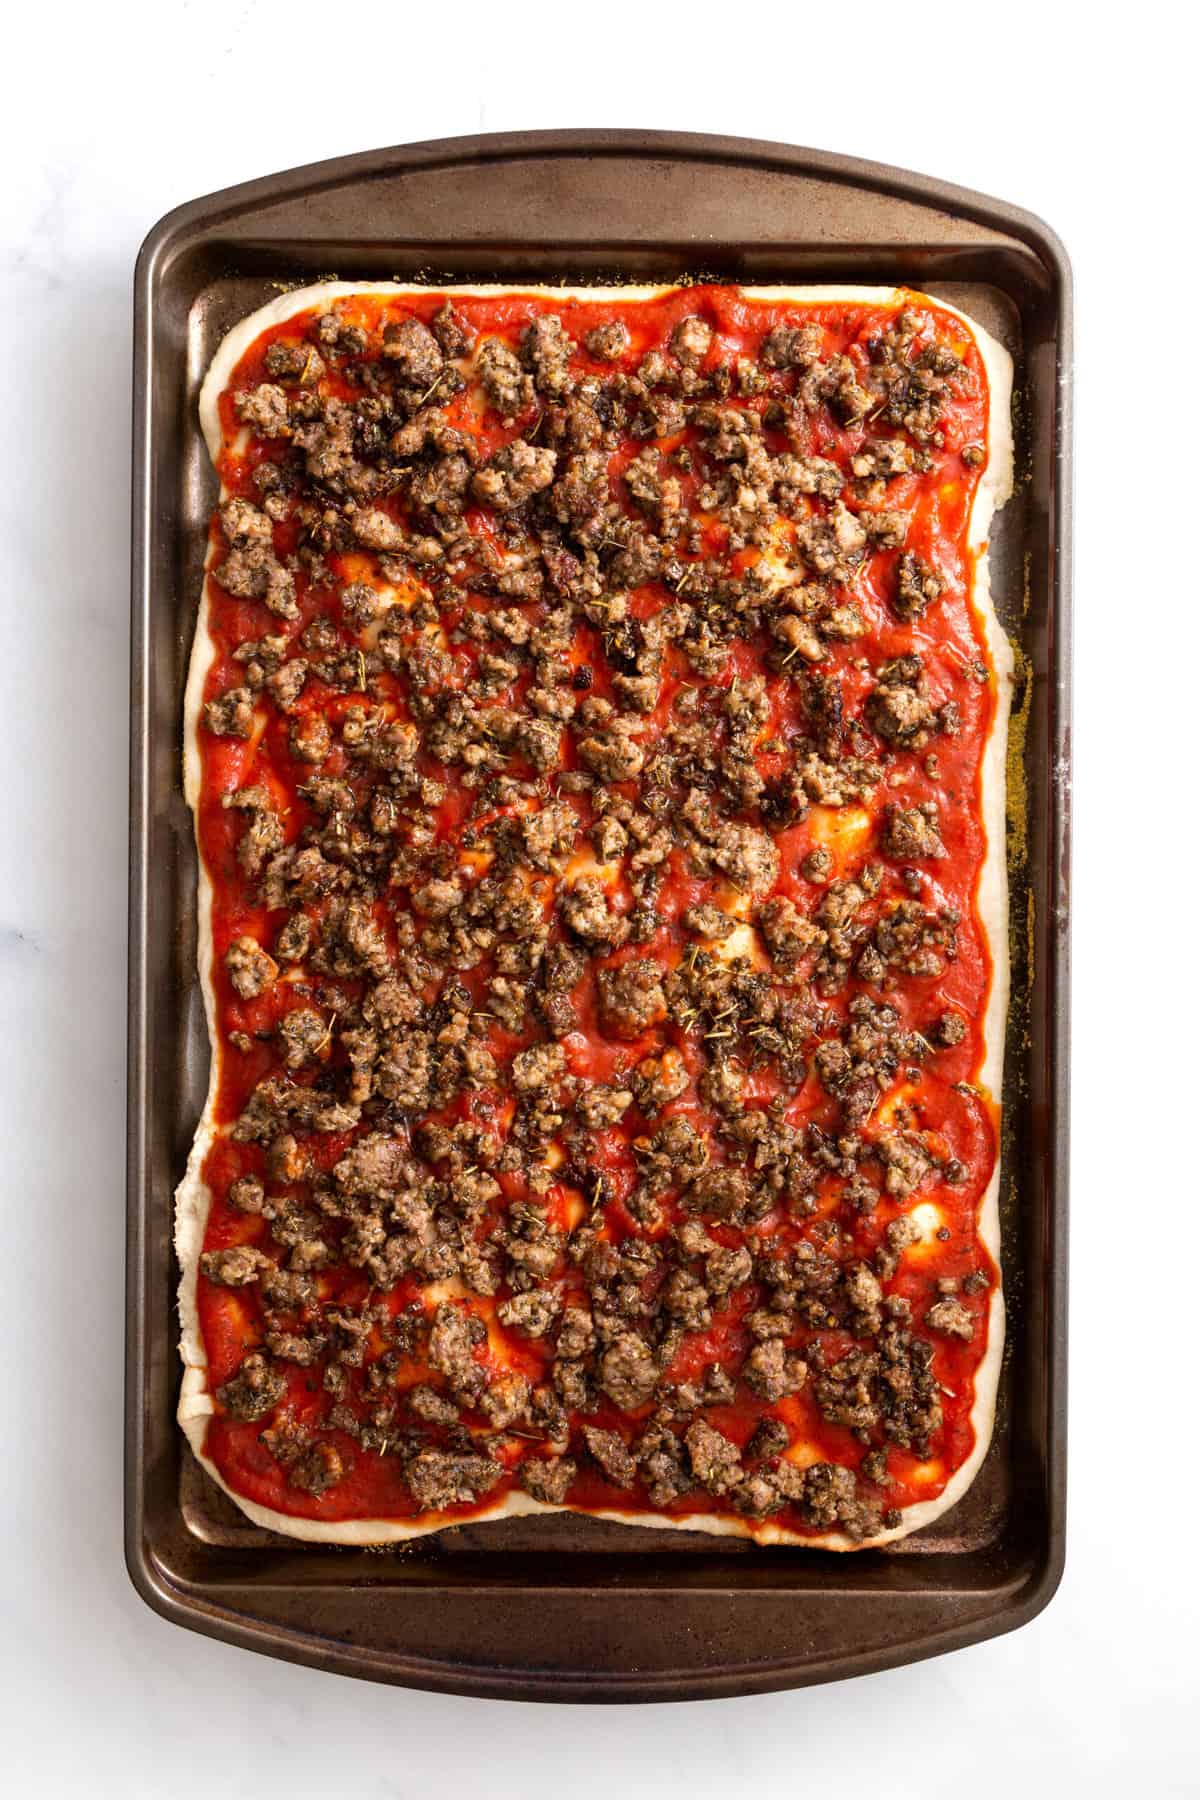 pizza dough layered at the bottom of a sheet pan, with pizza sauce, cooked sausage